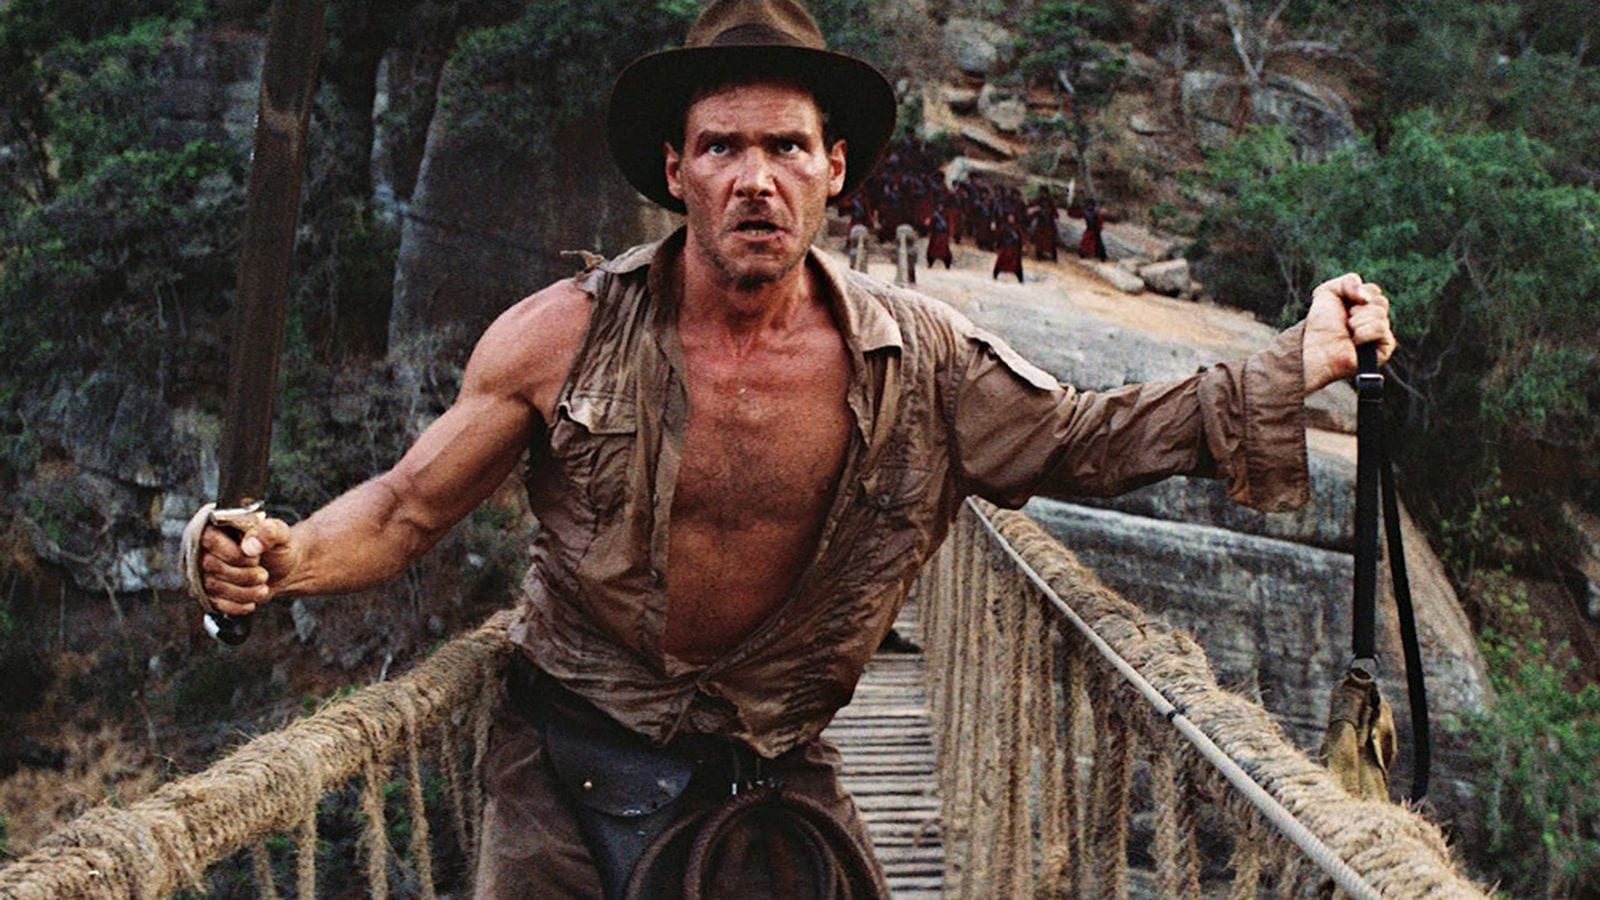 First Indiana Jones 5 Set Pics Revealed Geeks + Gamers